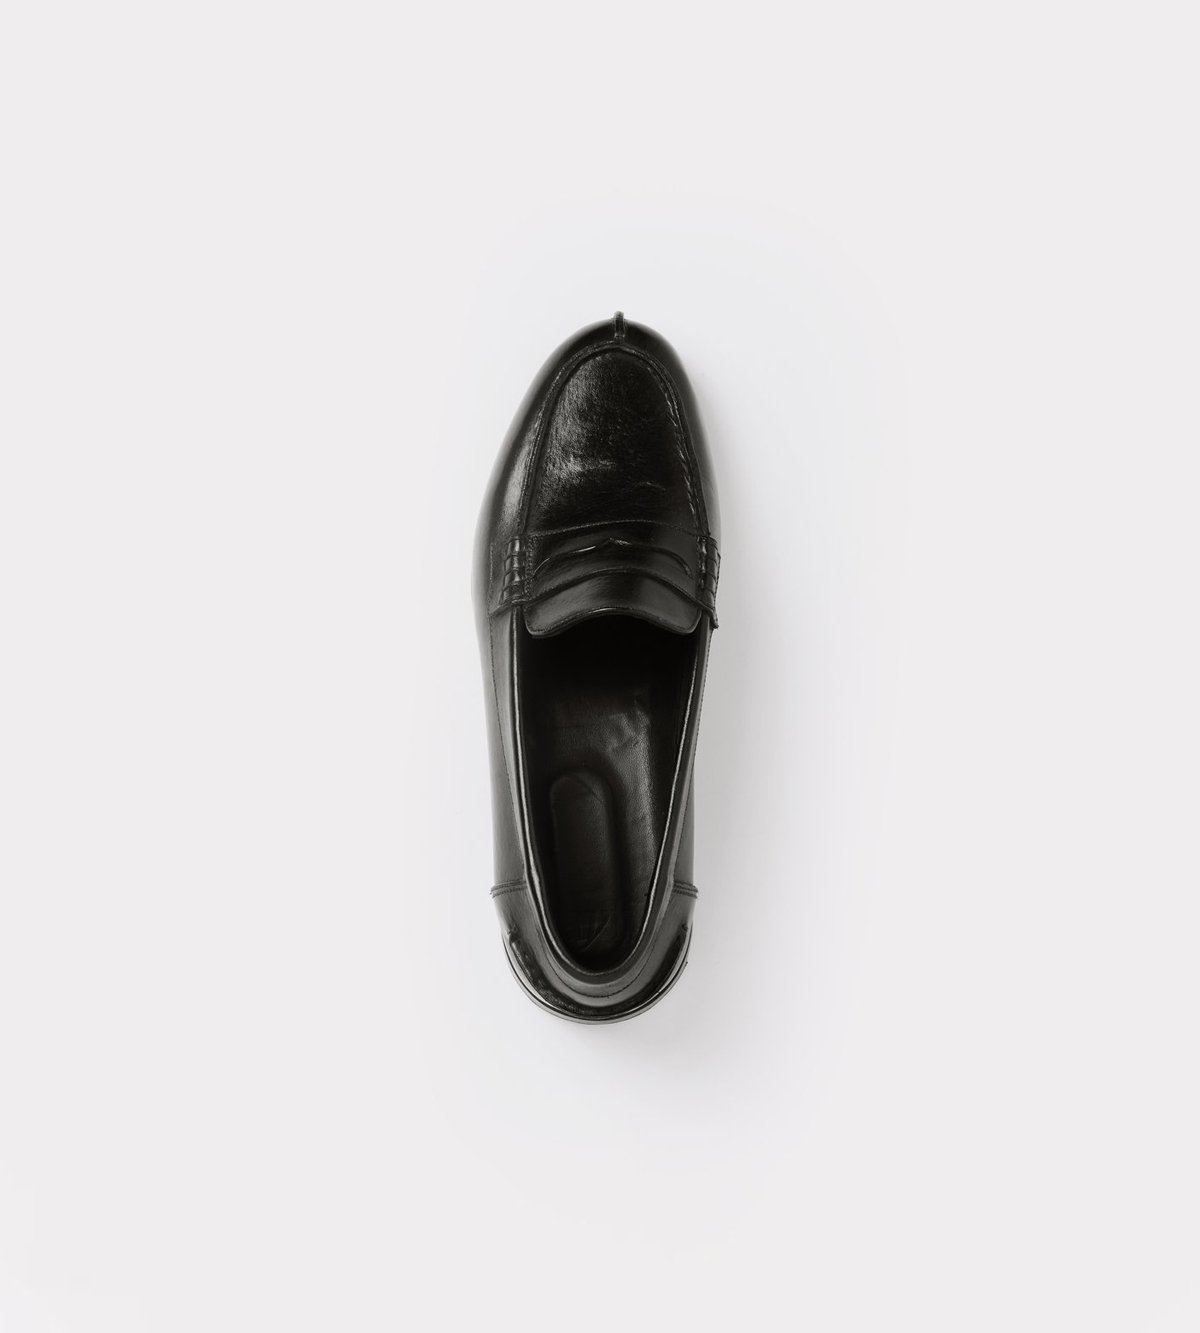 Handmade Moccasins in black leather